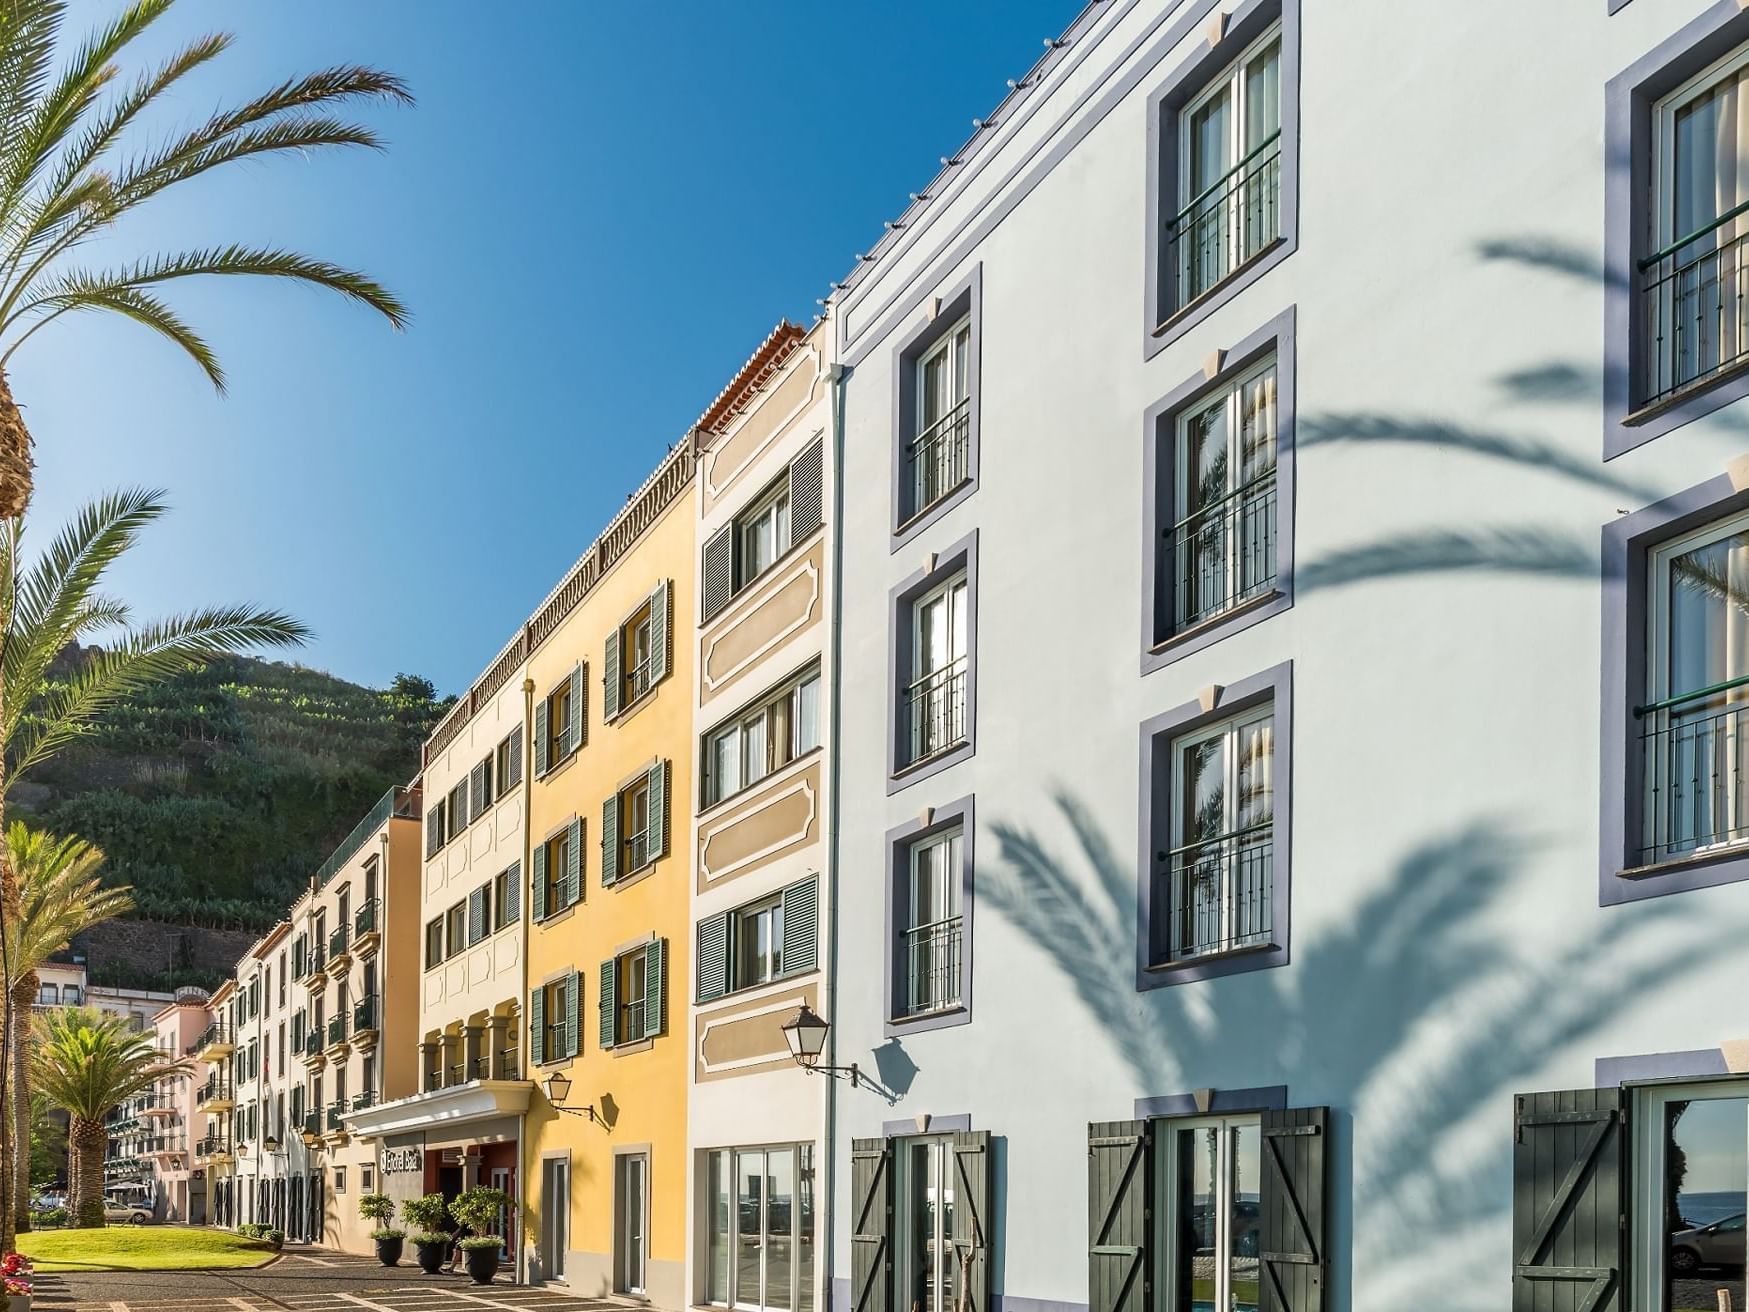 10% Special Offer at Enotel Sunset Bay in Ponta do Sol, Madeira